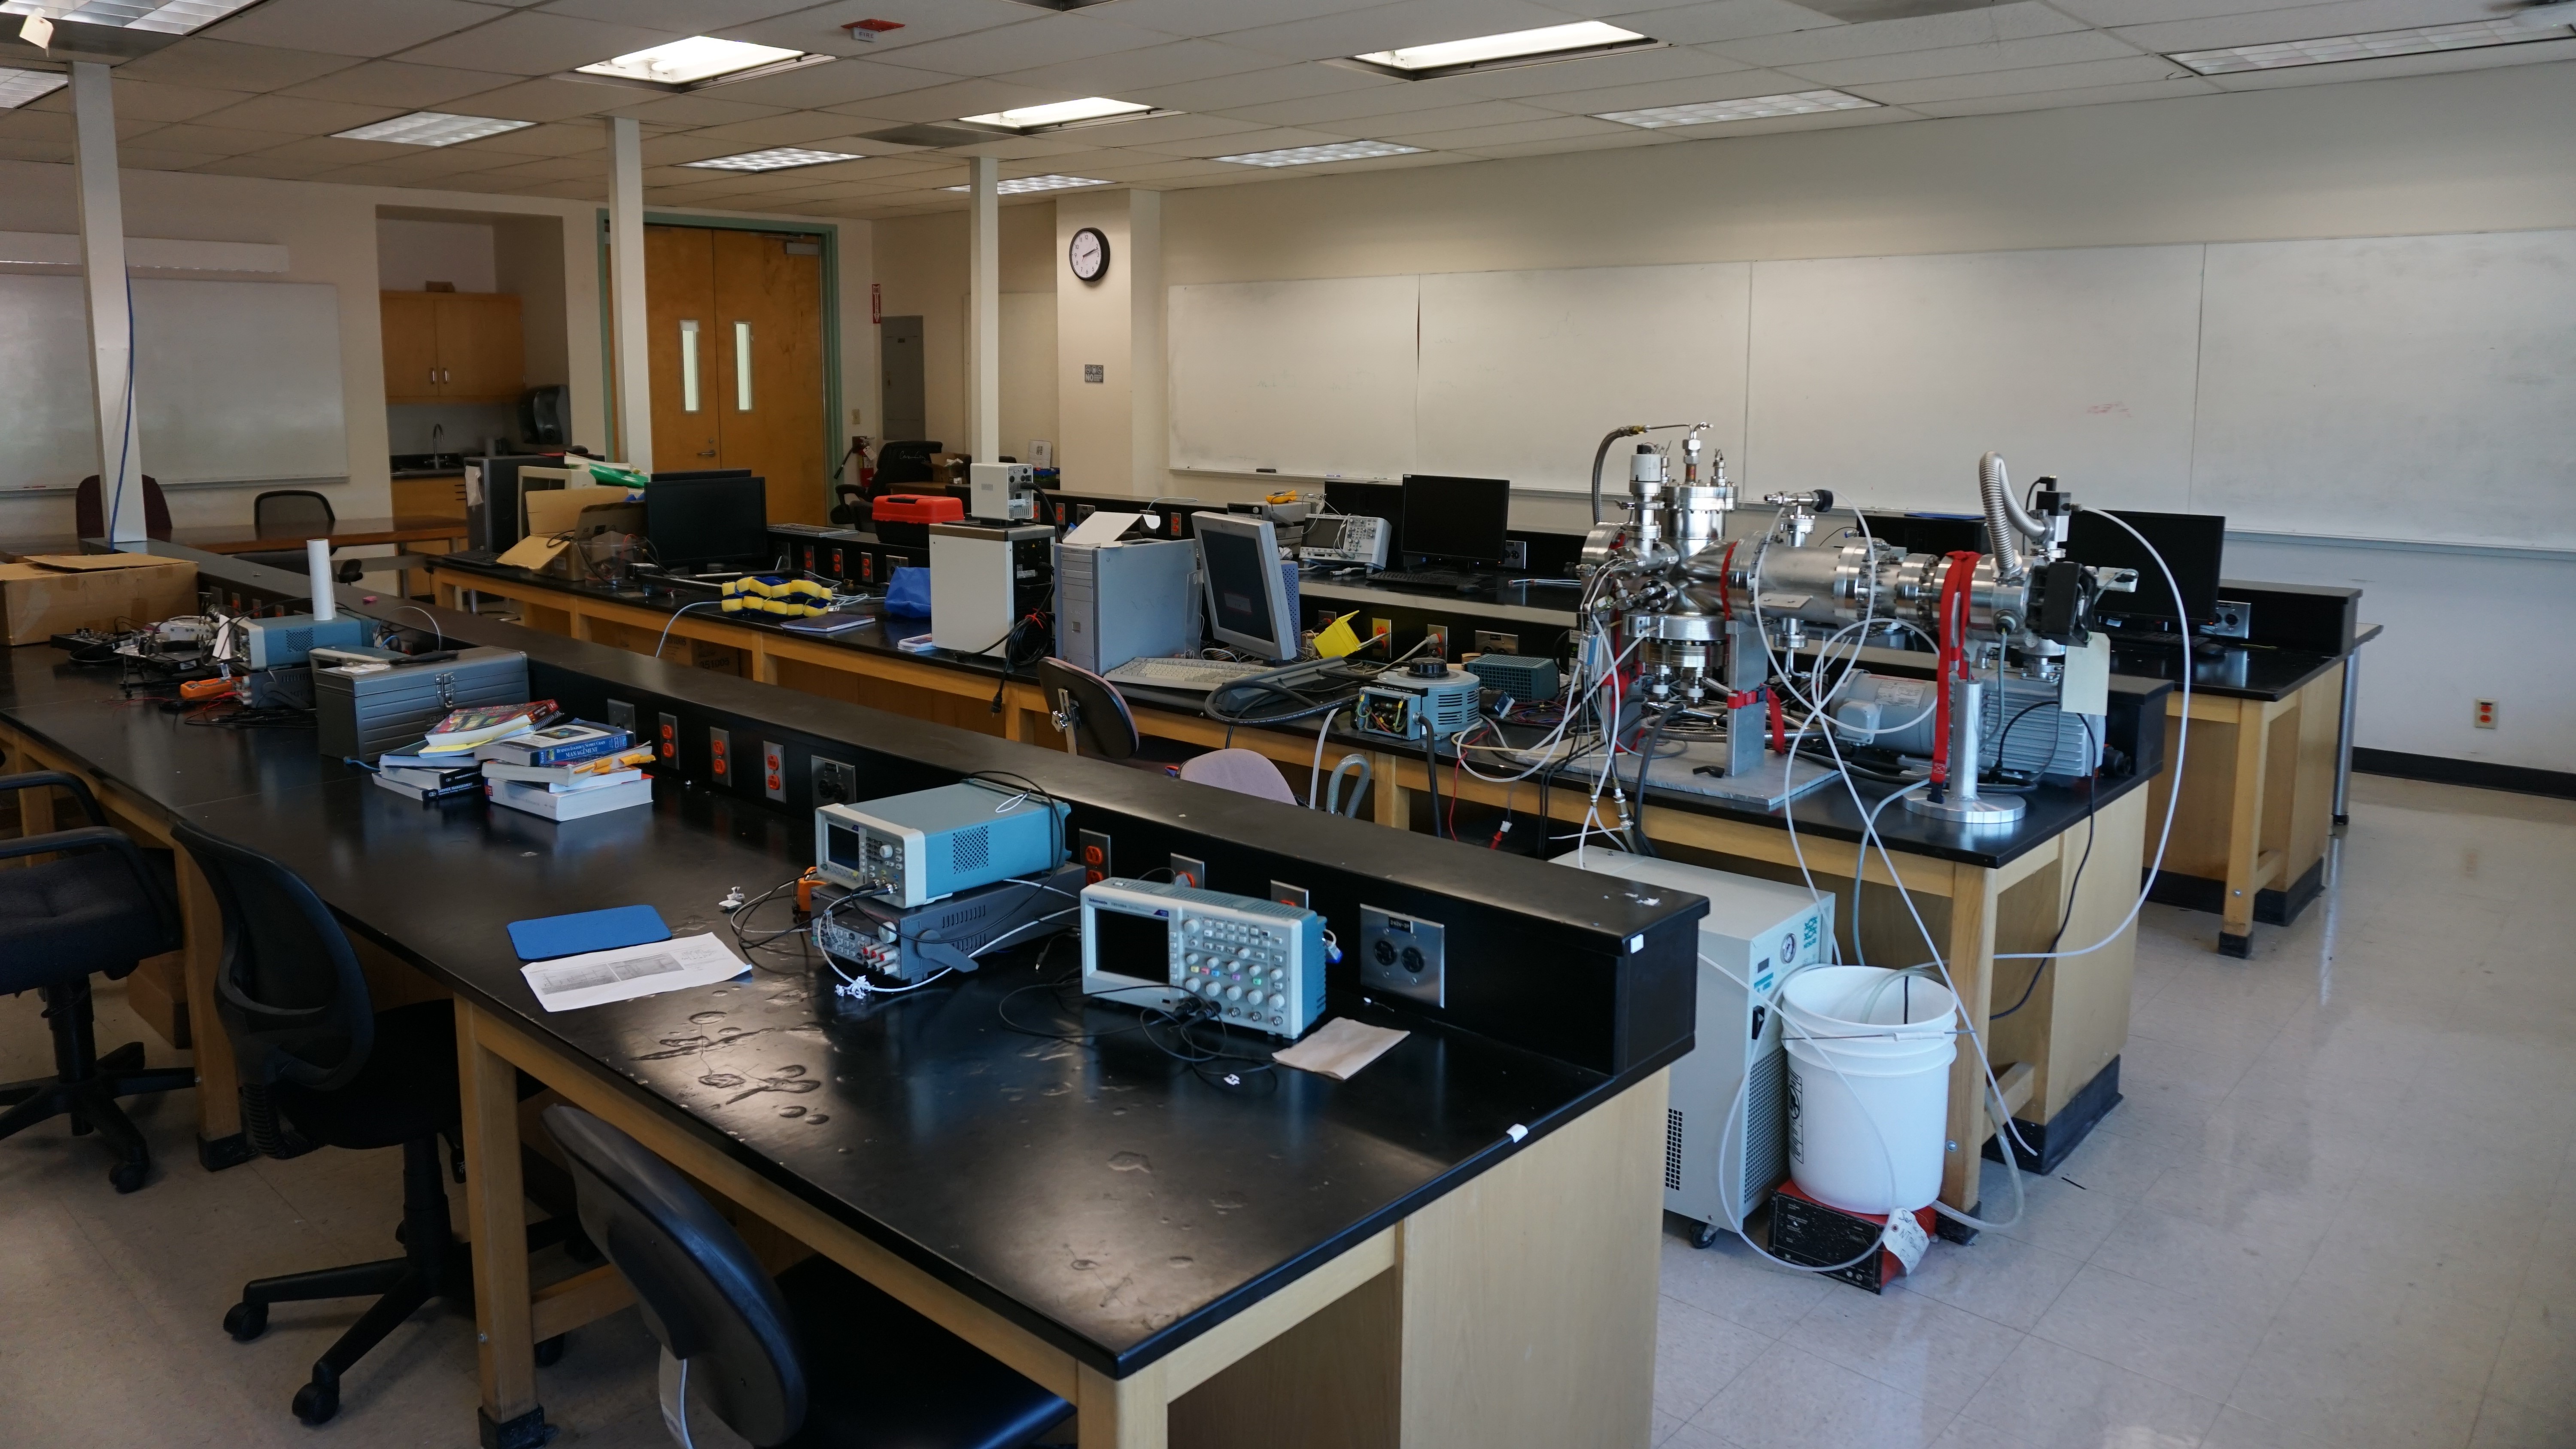 A classroom full of various types of electronics equipment.